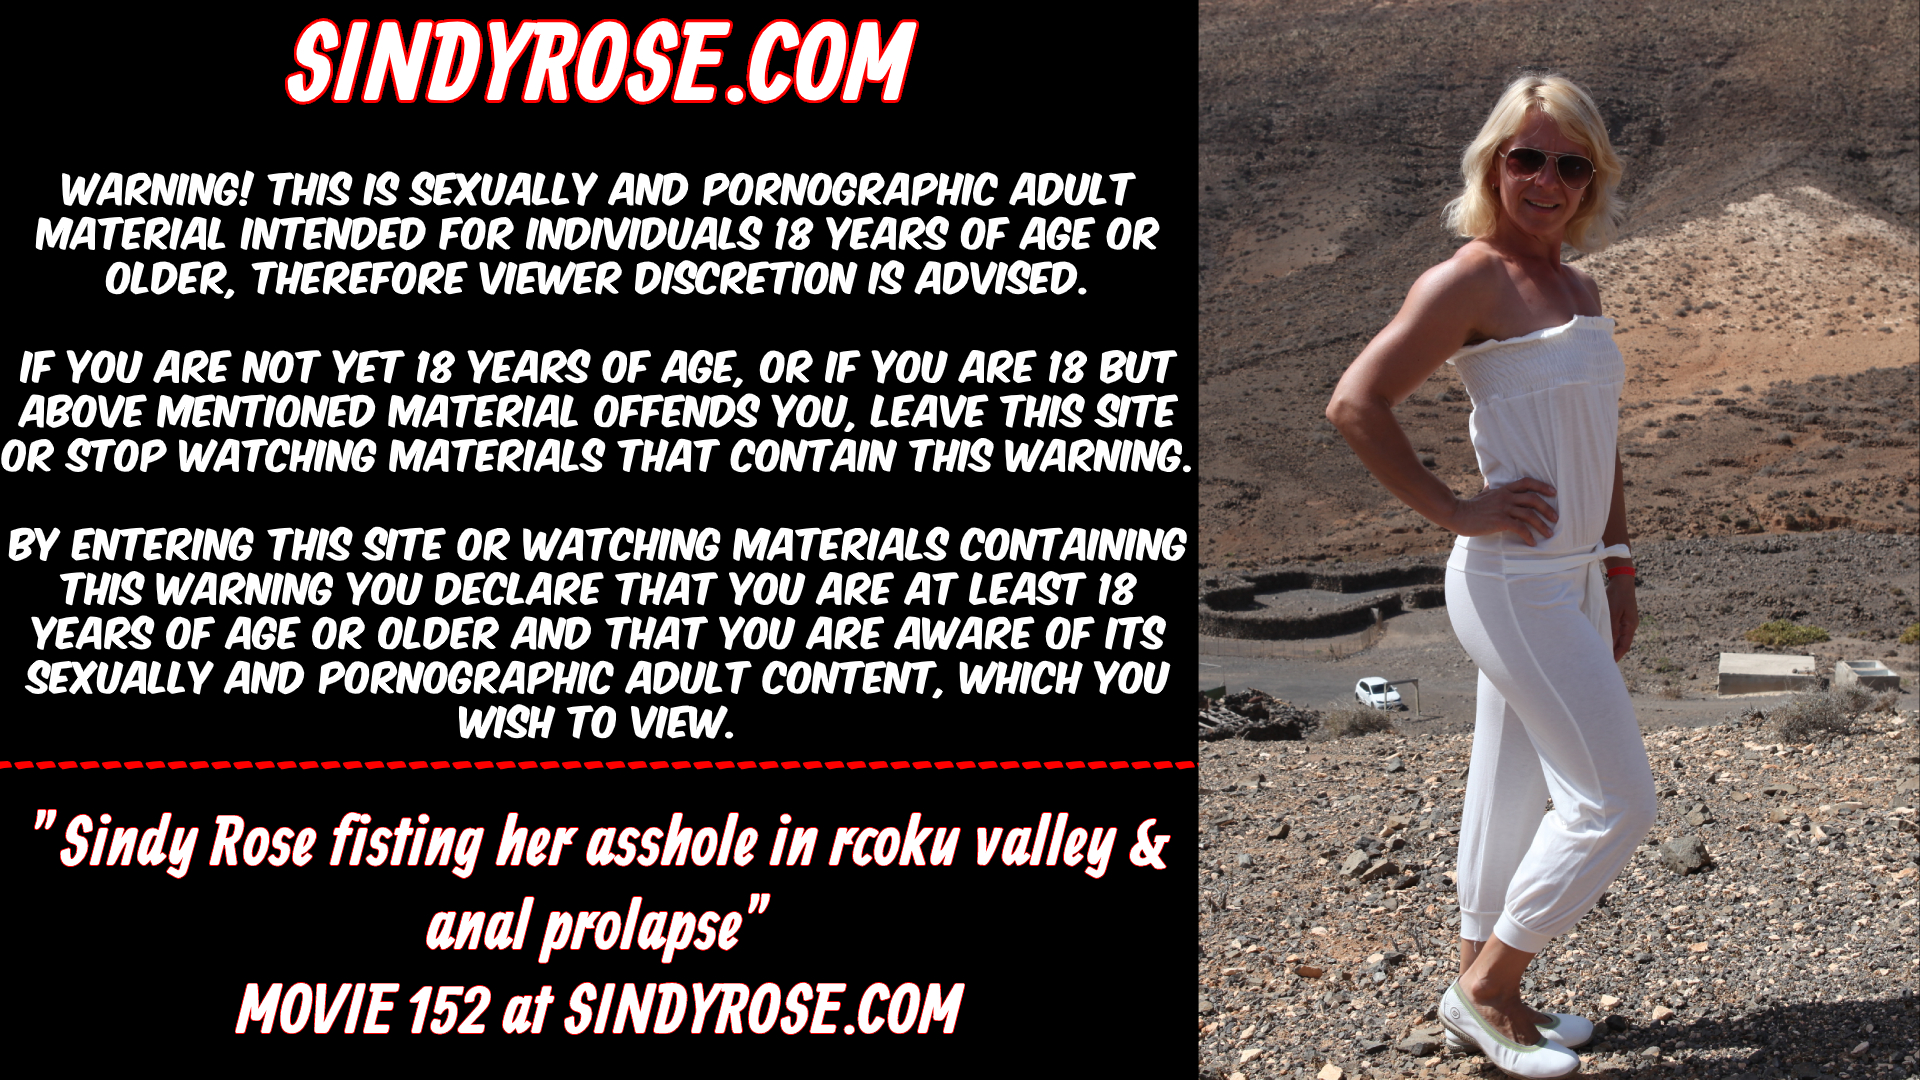 Sindy Rose fisting anal in rocky valley & prolapse